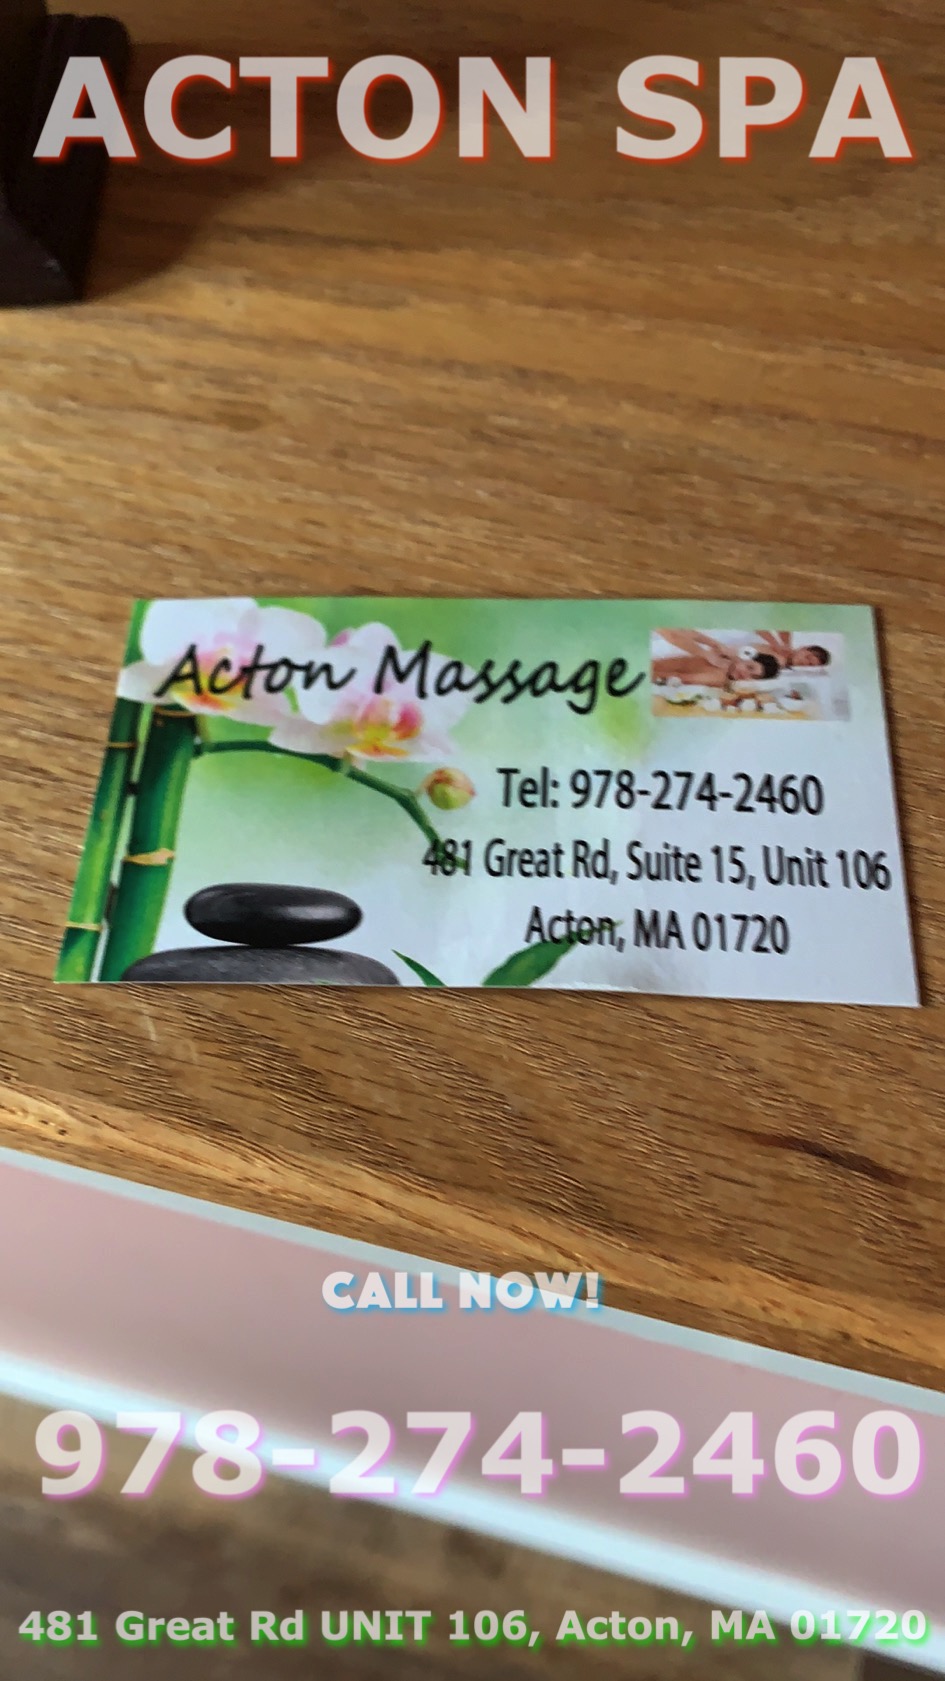 Acton Spa | 481 Great Rd UNIT 106, Acton, MA 01720, United States | Phone: (978) 274-2460